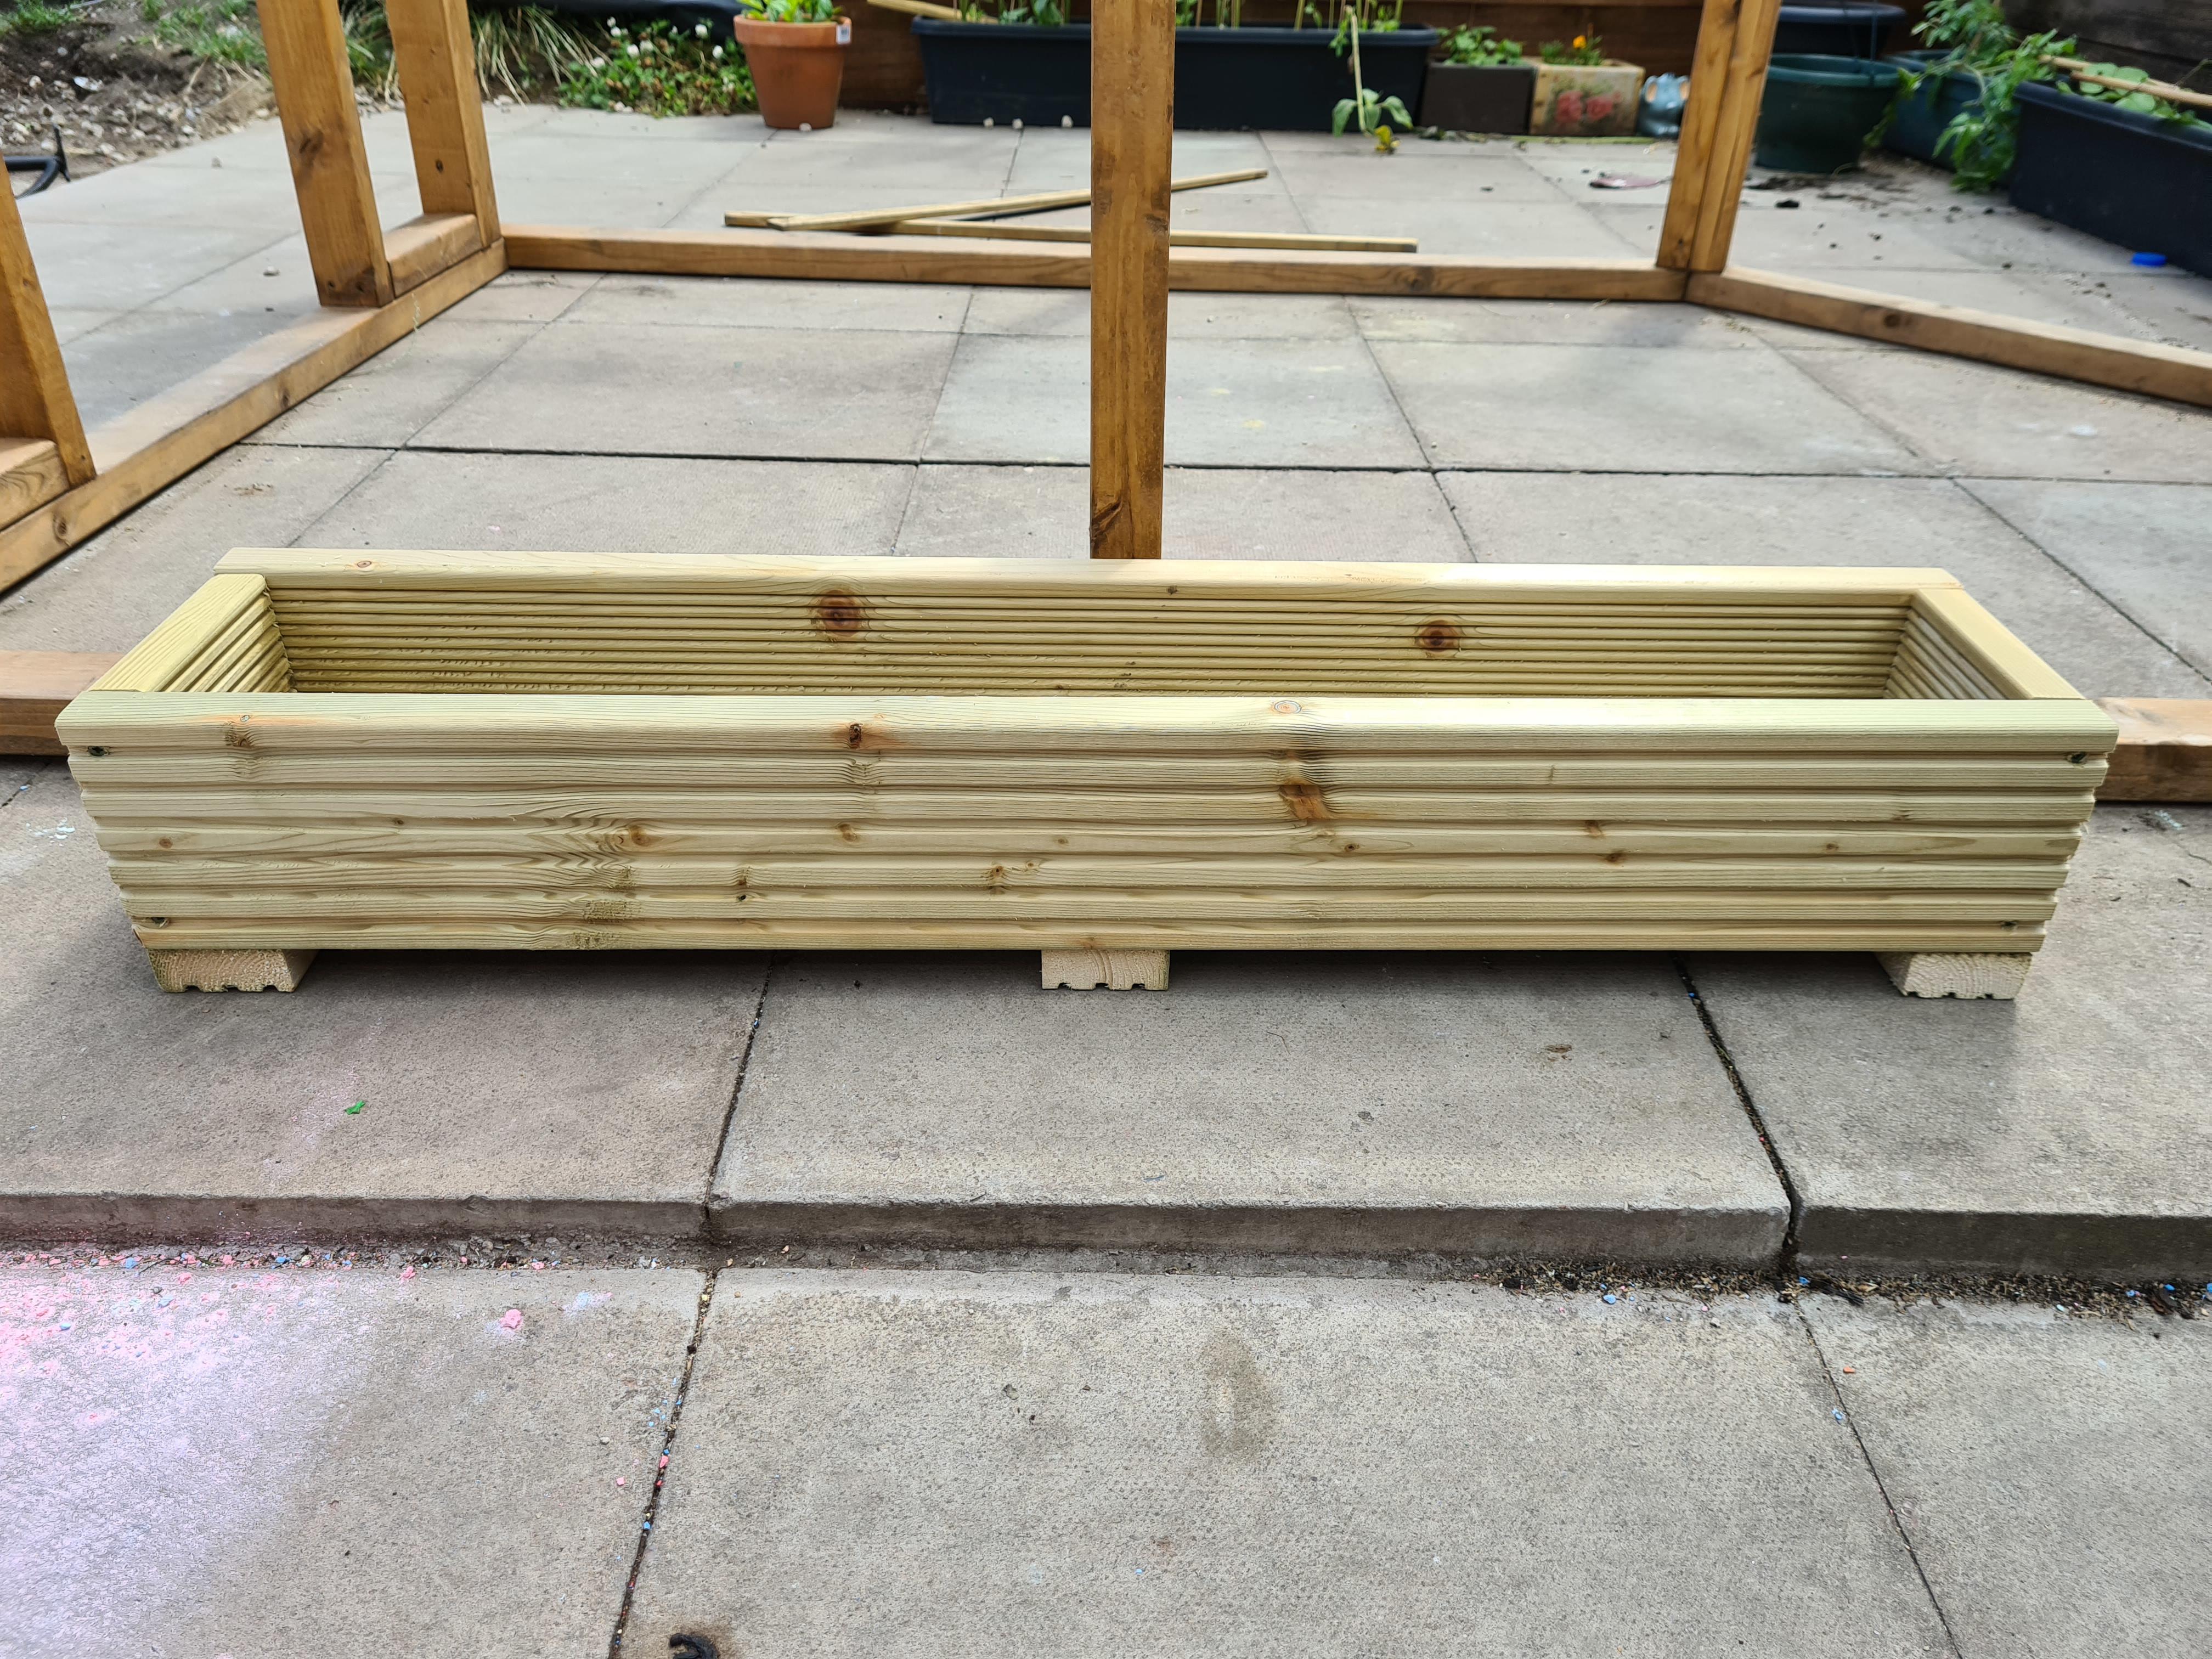 decking planter with wooden frame in background on a slap base